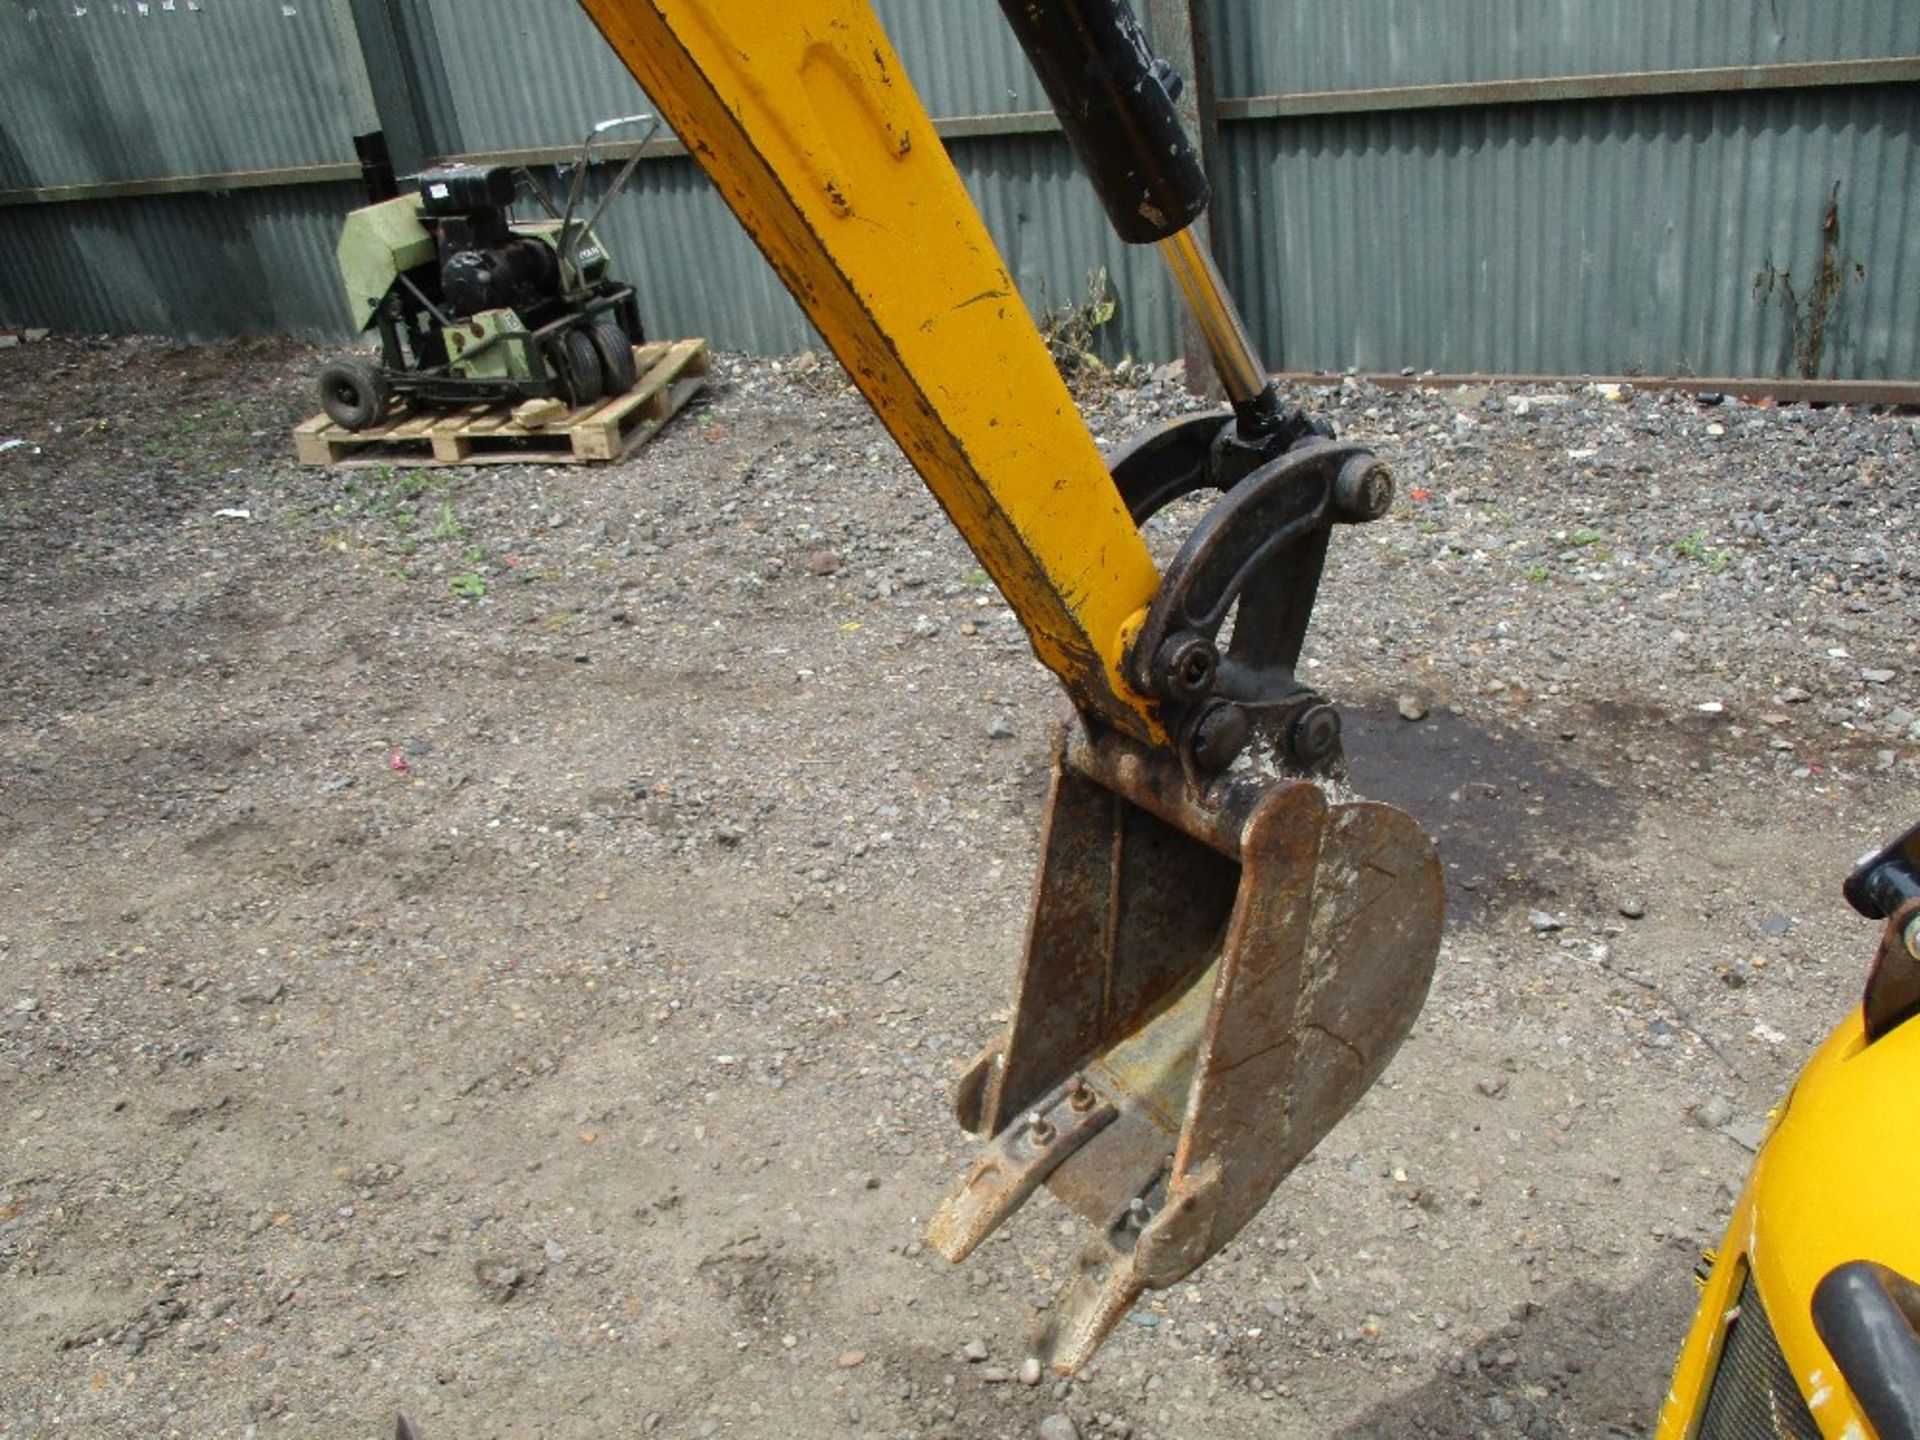 JCB 8008 CTS MICRO EXCAVATOR EXPANDING TRACKS 767REC HRS - Image 2 of 6